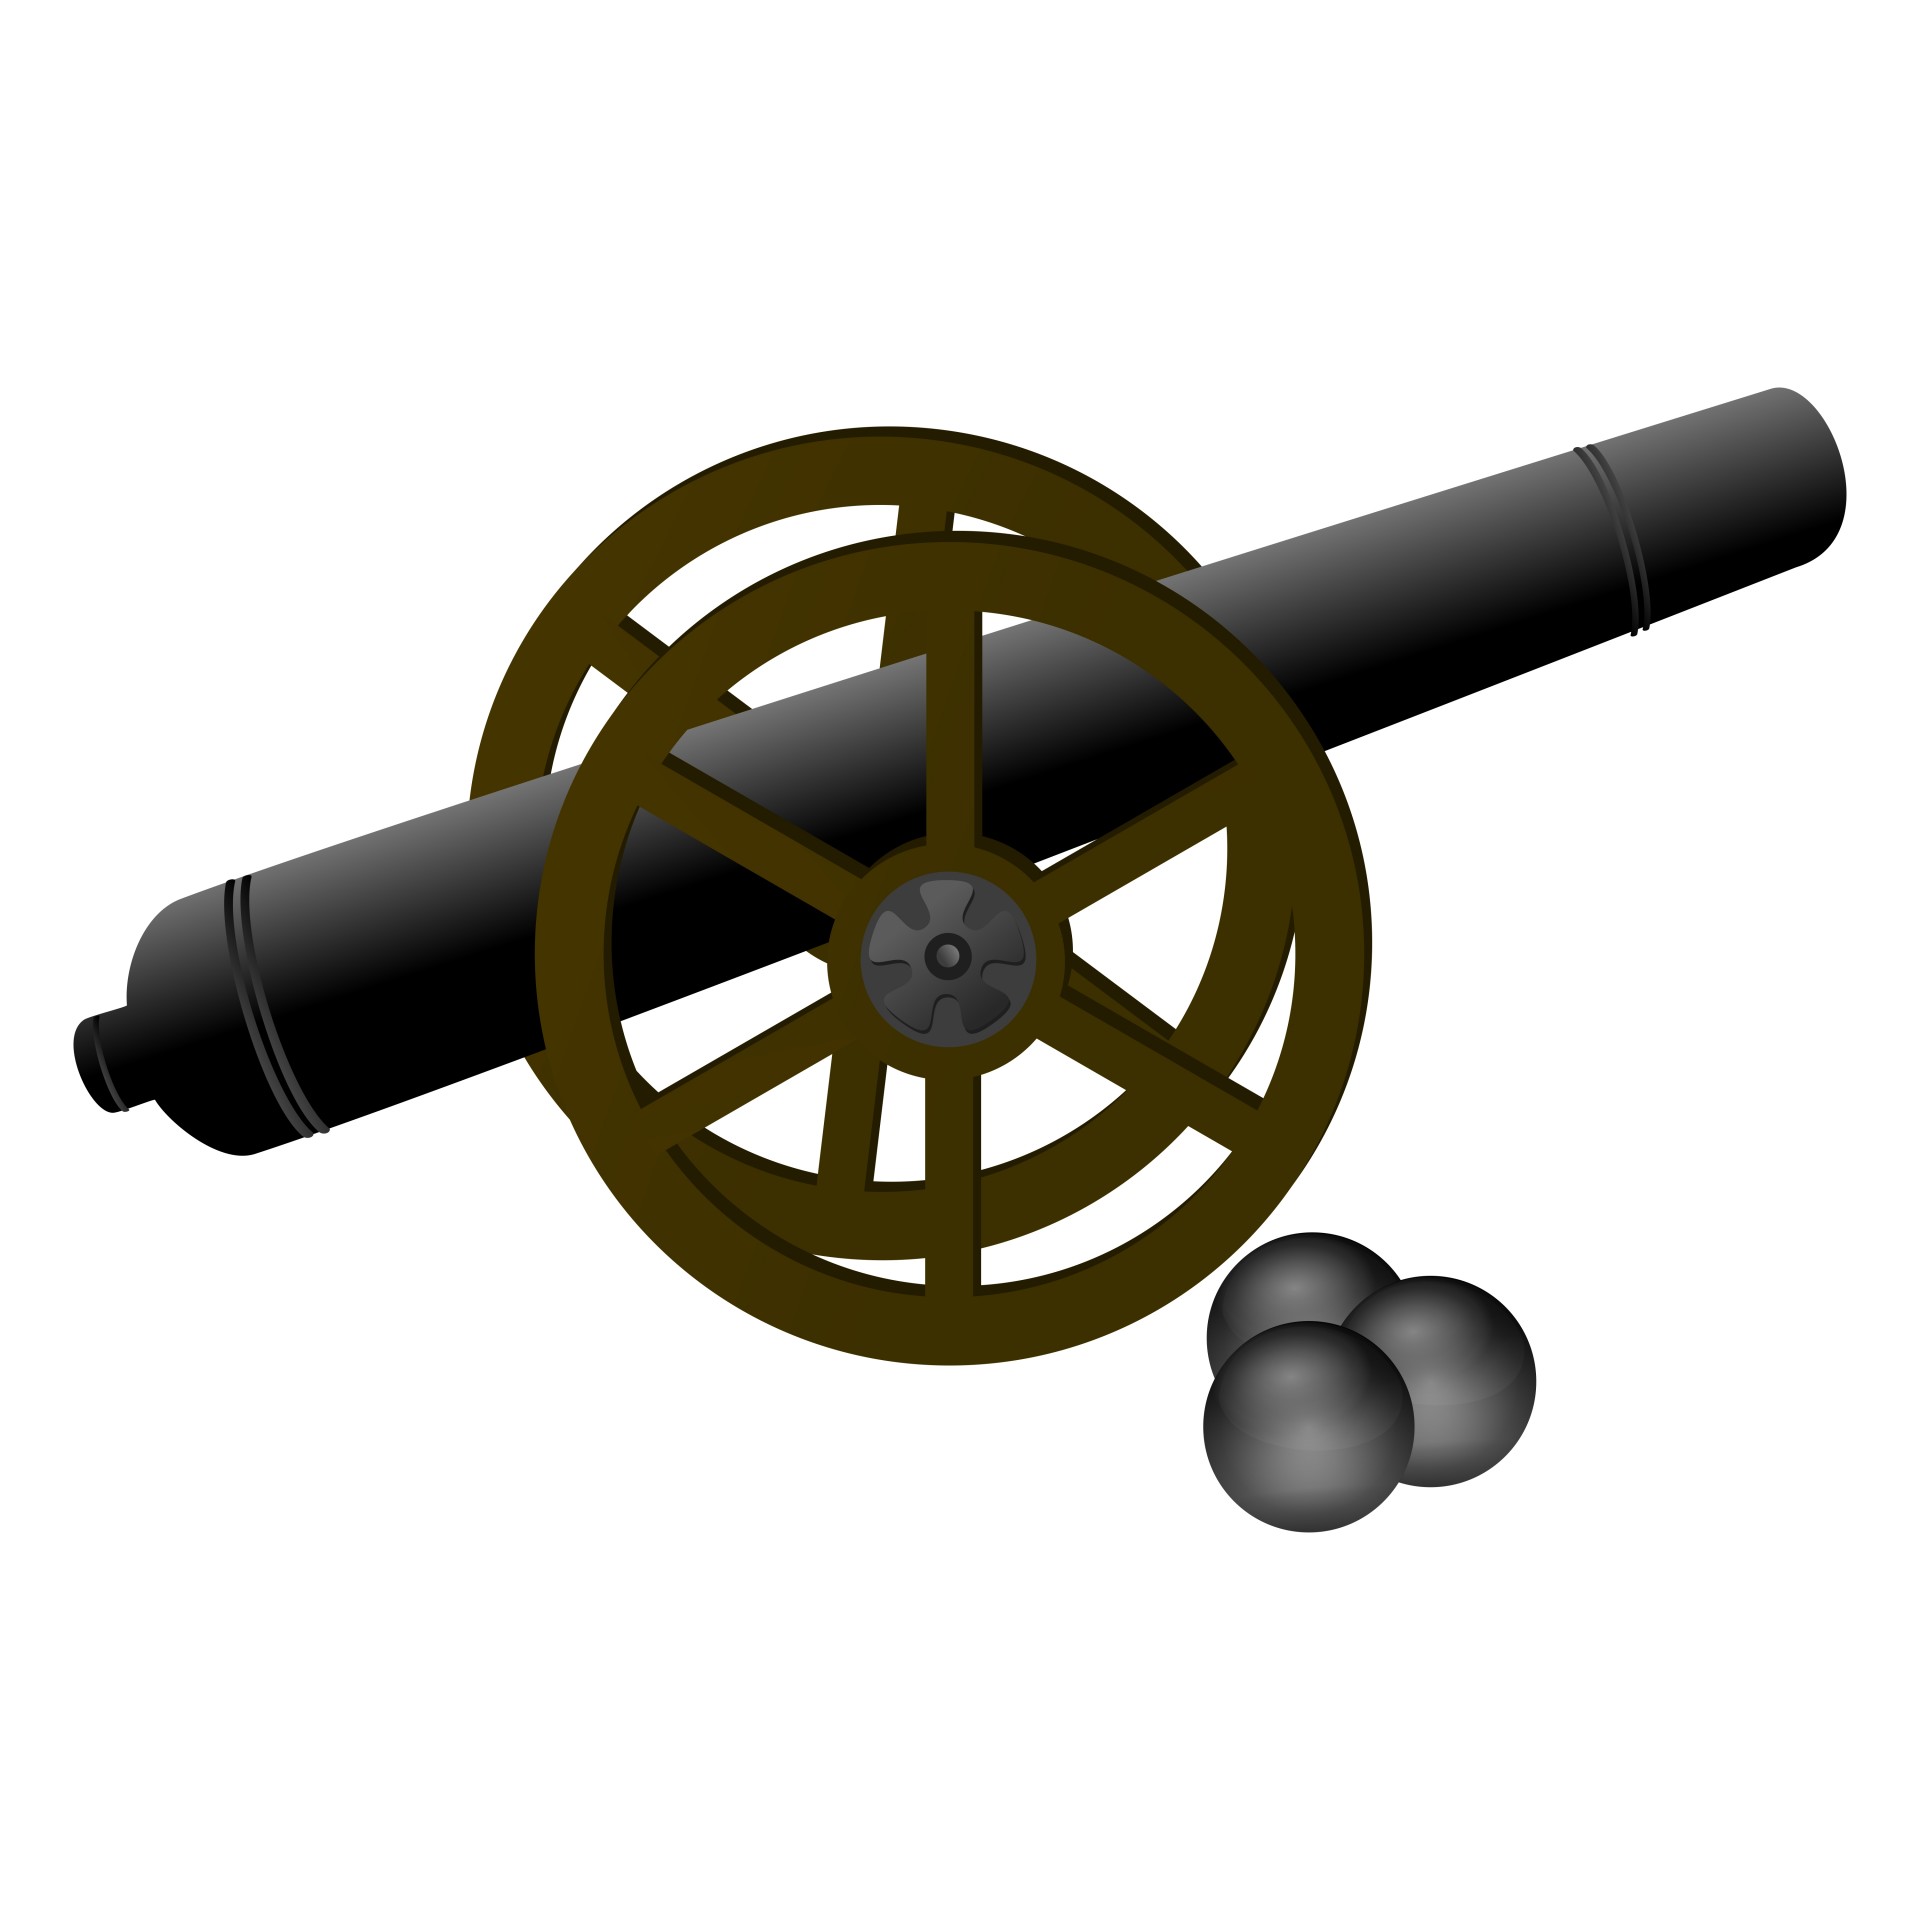 Cannon With Cannon Balls